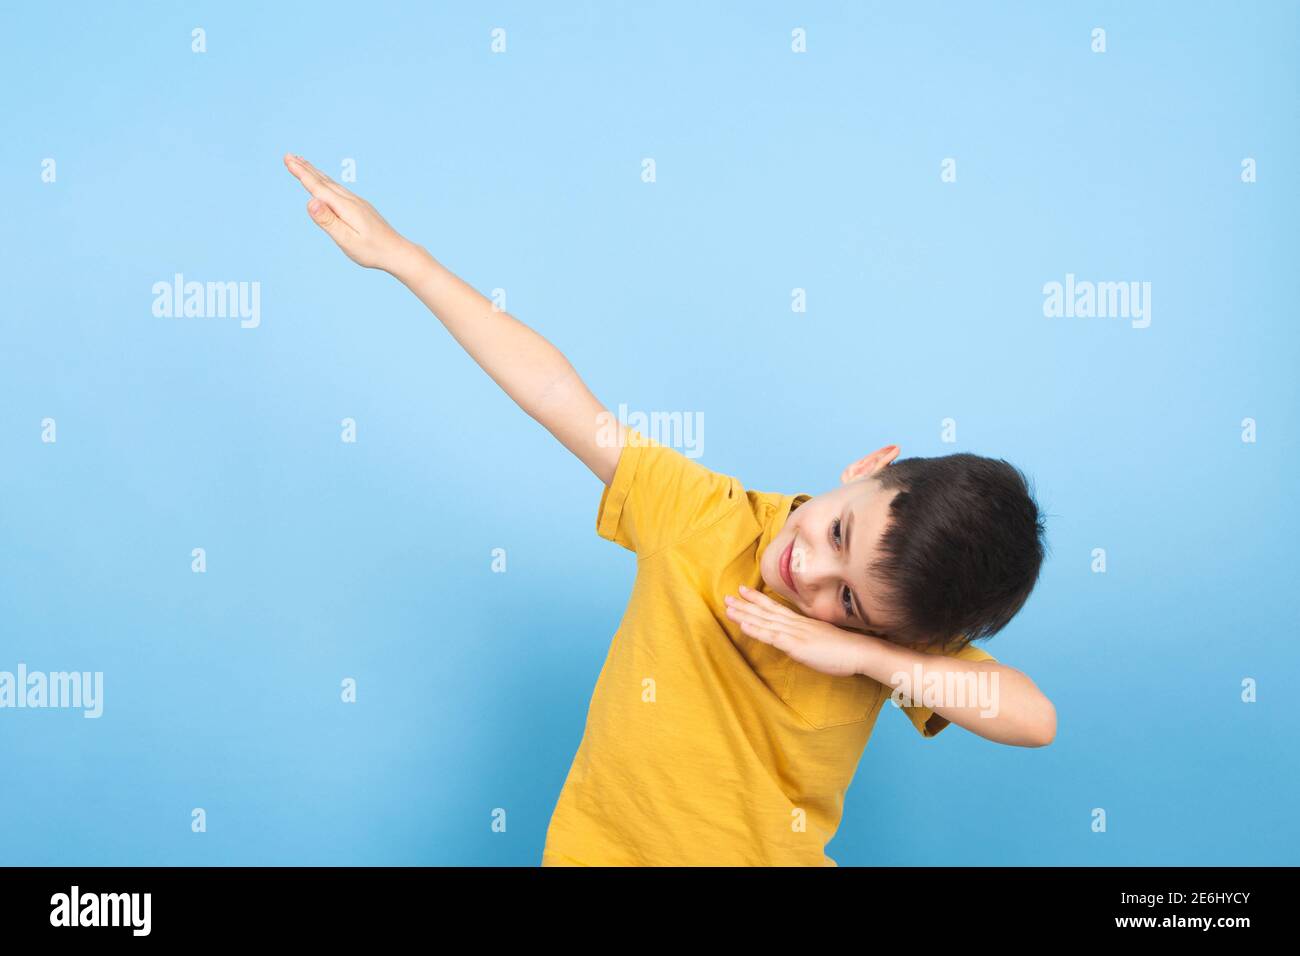 a child celebrates victory with a hand gesture to the sky Stock Photo